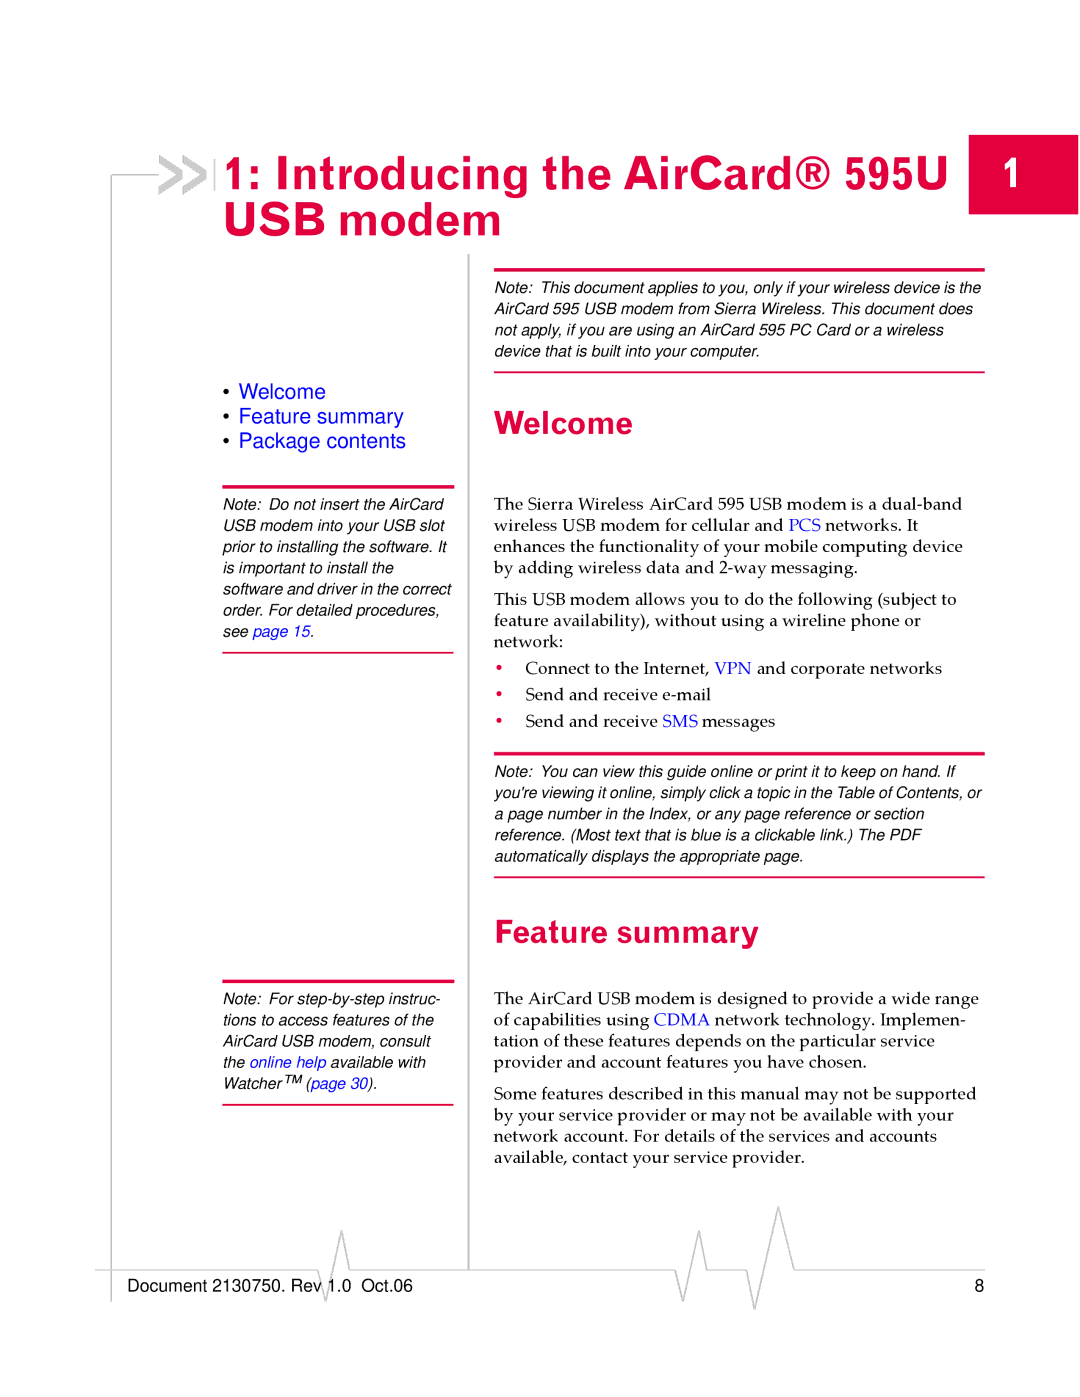 Sierra Wireless manual Introducing the AirCard 595U 1 USB modem, Welcome, Feature summary 